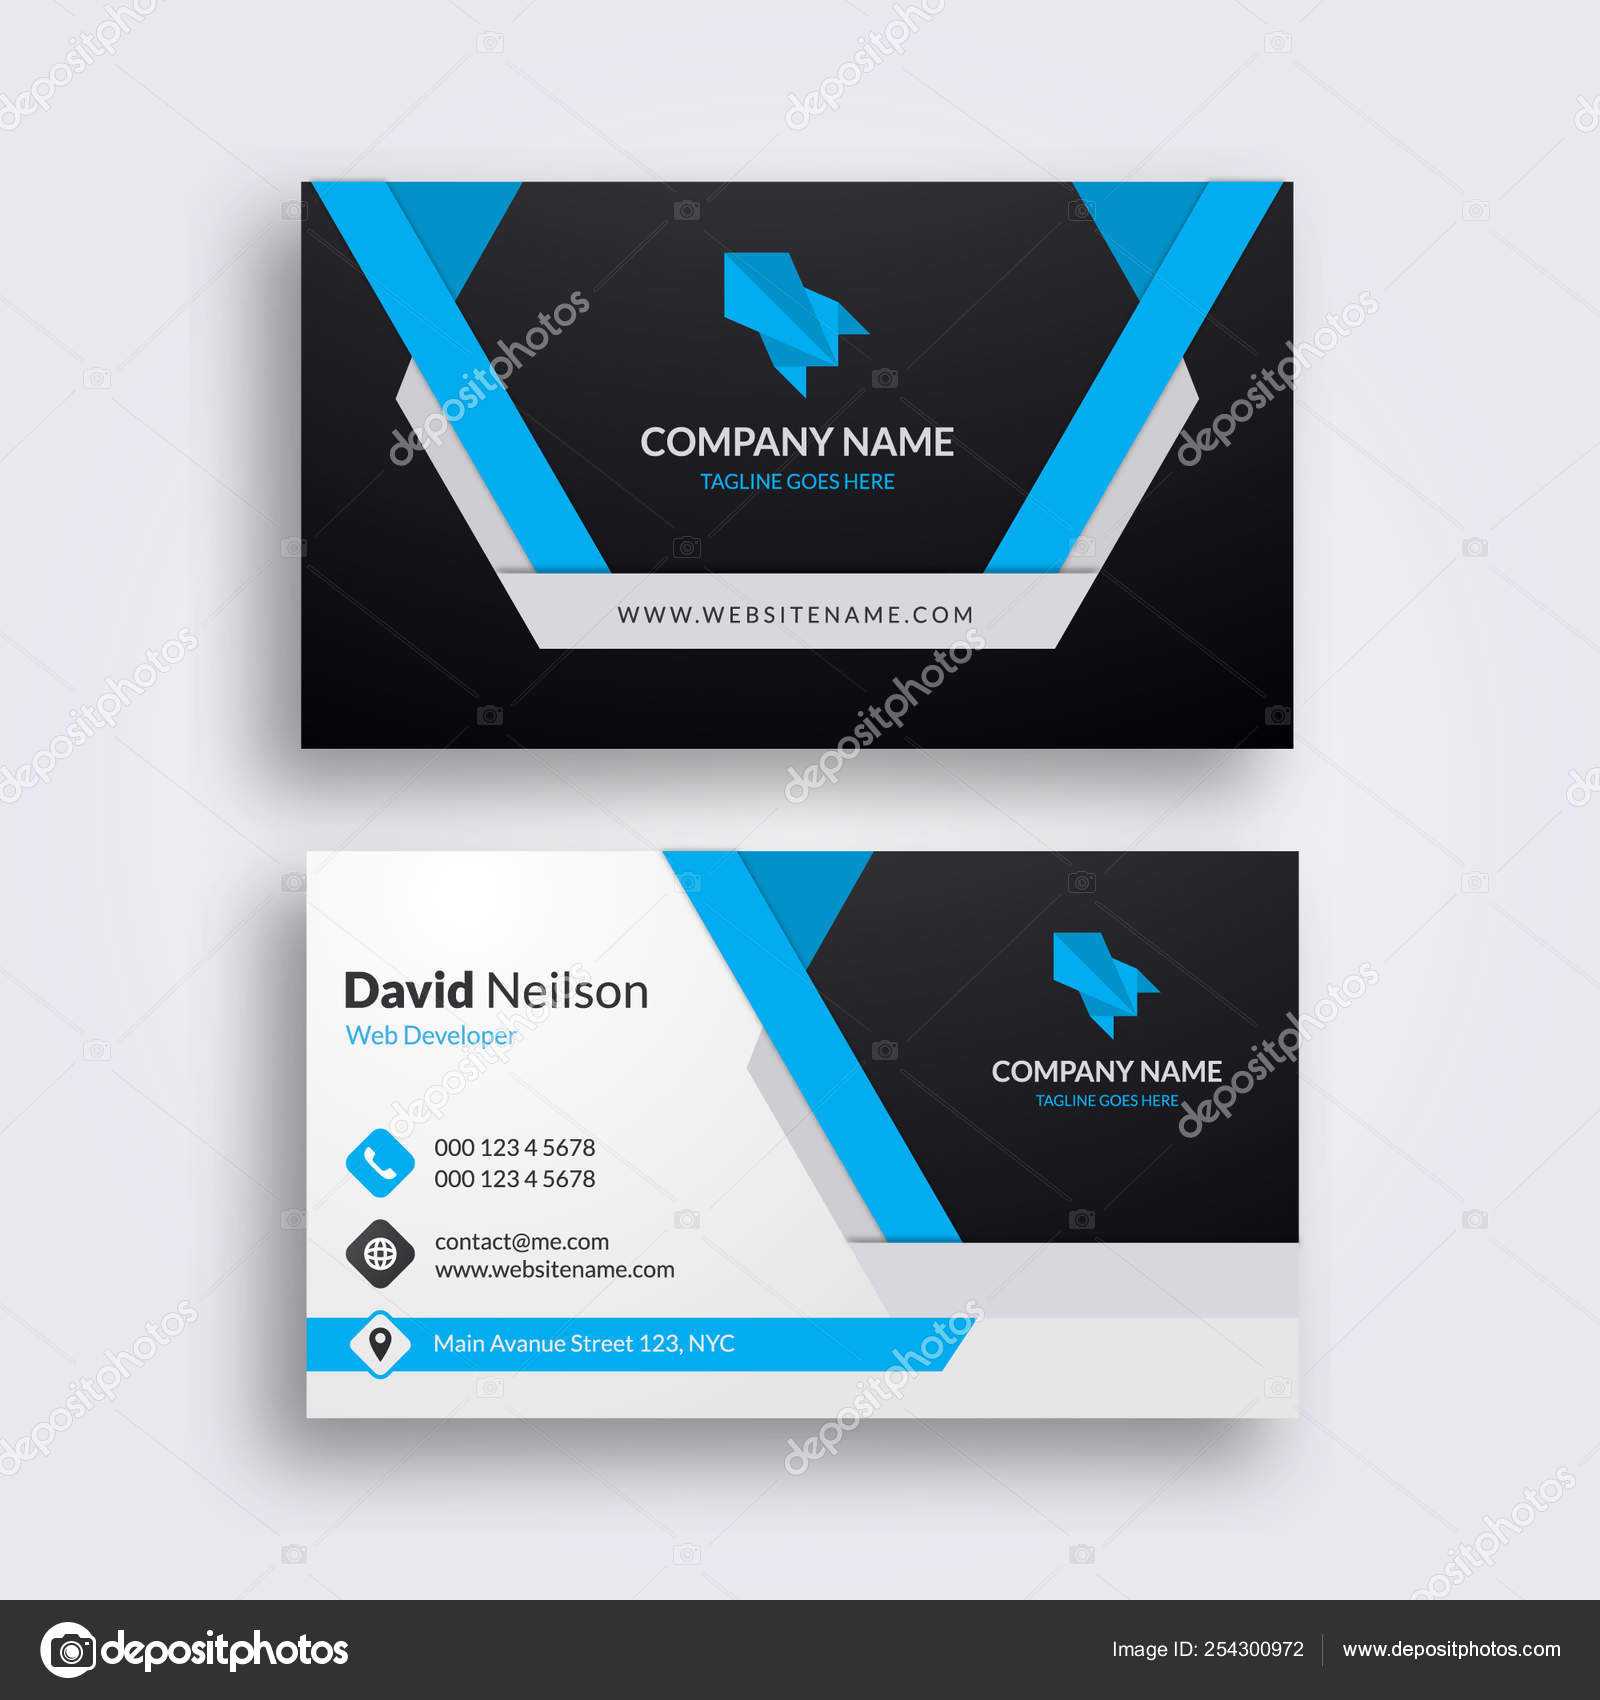 Professional Abstract Business Card Clean Fresh Design With Visiting Card Illustrator Templates Download